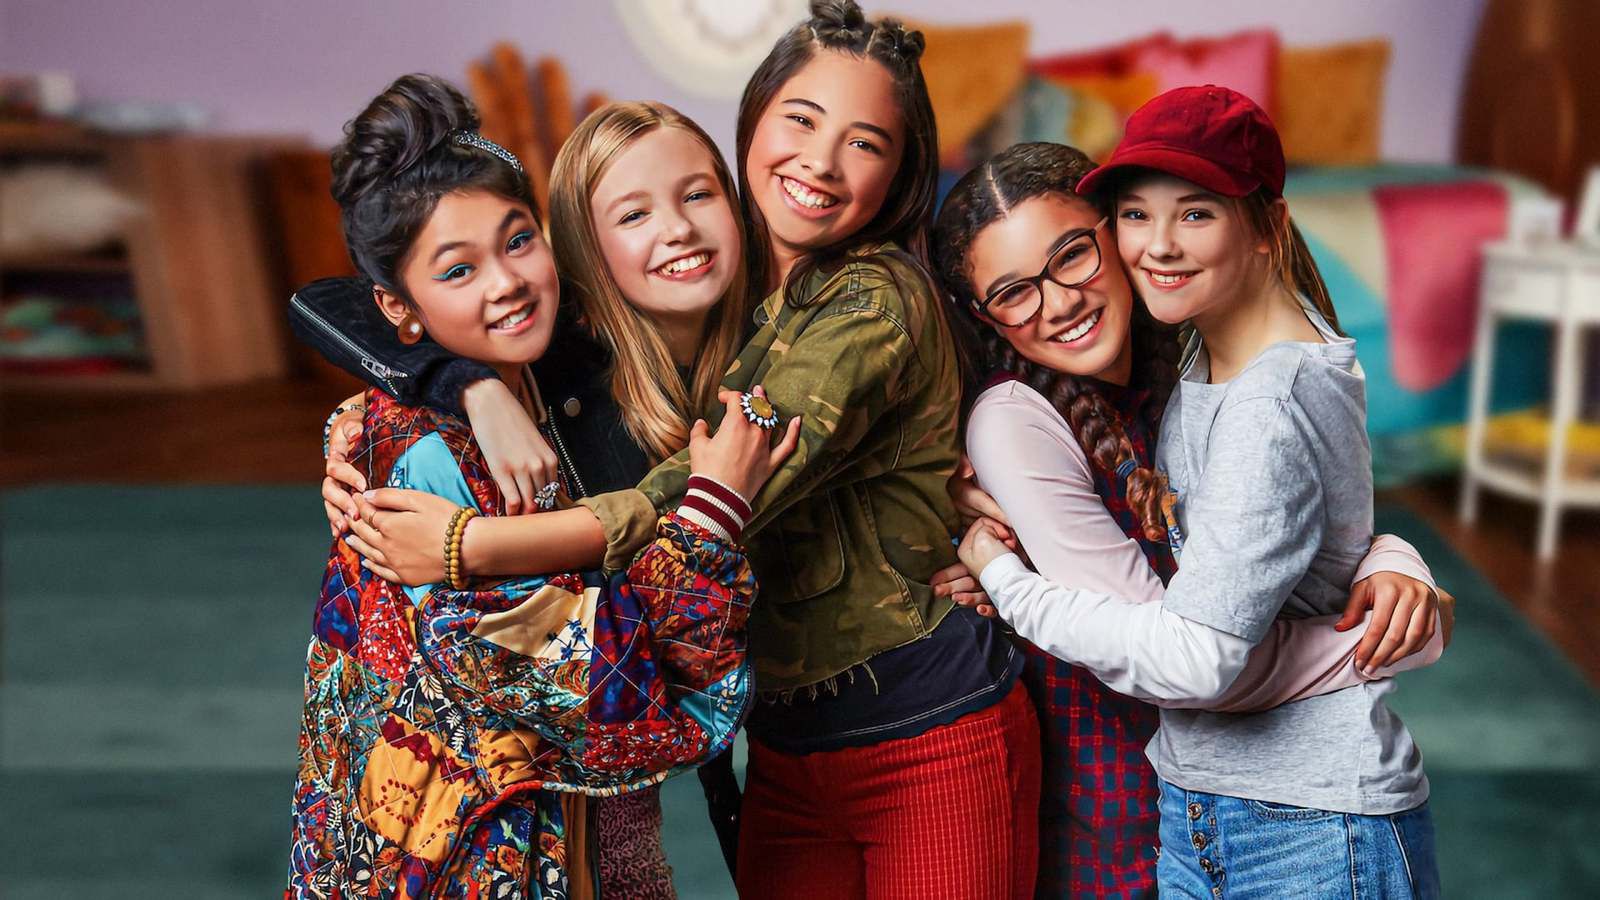 Download The Baby Sitters Club Season 1 Episode 2 2020 English